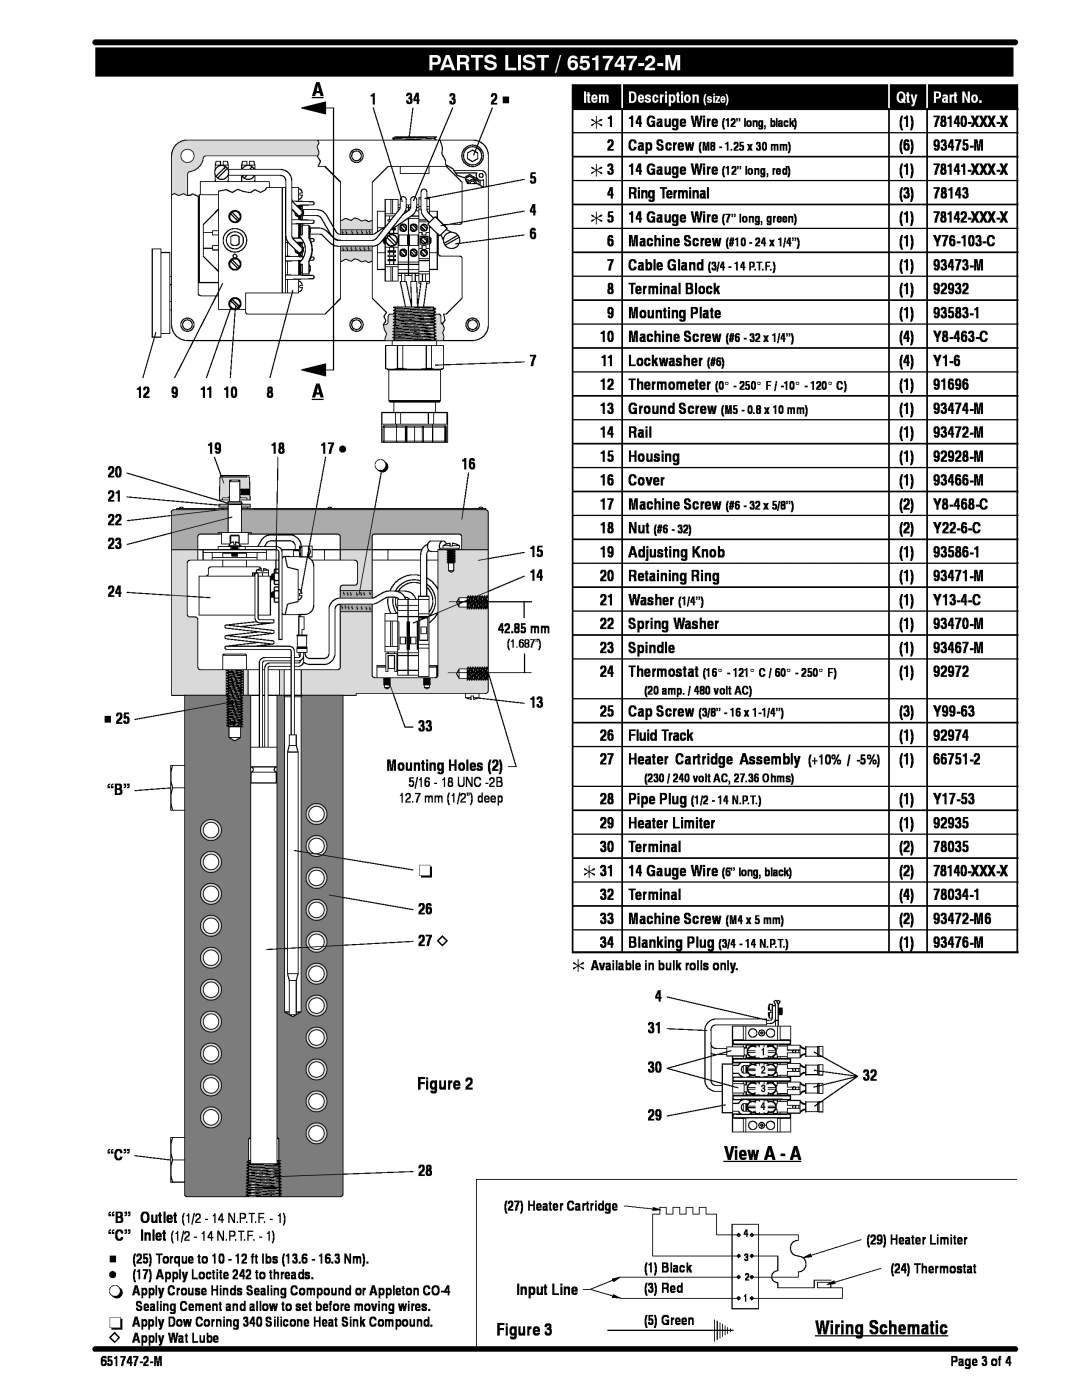 Ingersoll-Rand manual View A - A, Wiring Schematic, PARTS LIST / 651747-2-M, Description size 